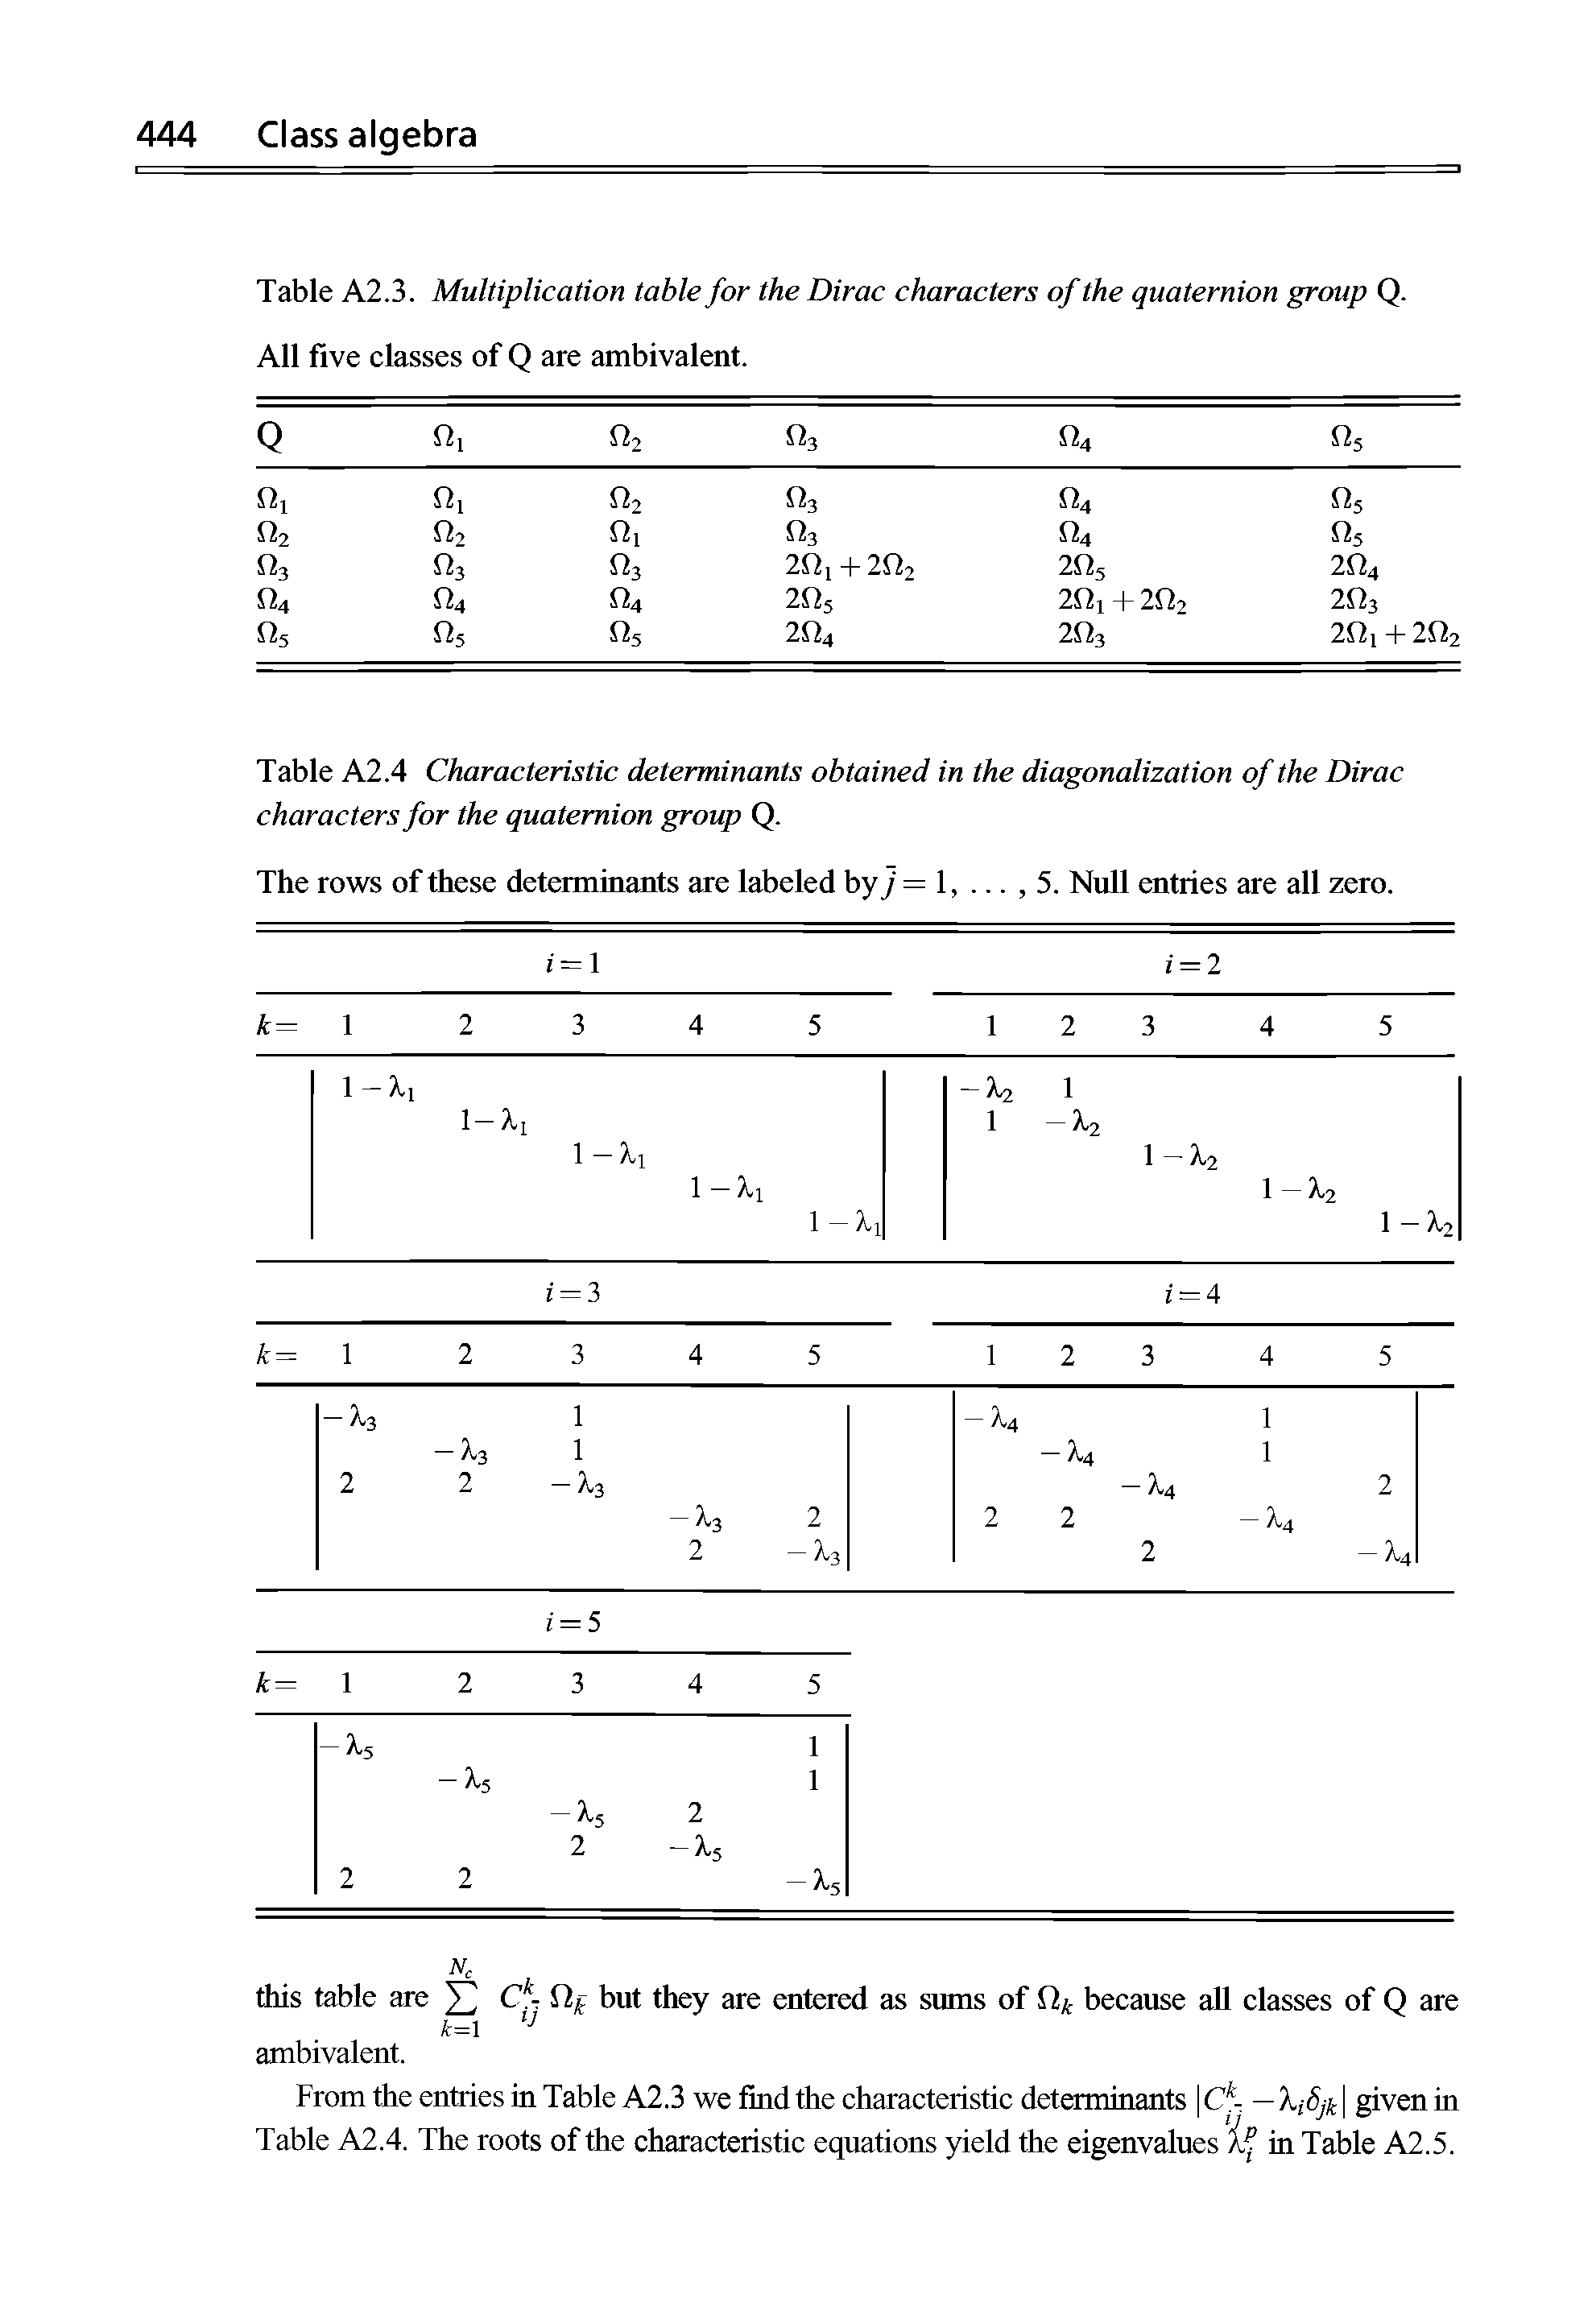 Table A2.4 Characteristic determinants obtained in the diagonalization of the Dirac characters for the quaternion group Q.